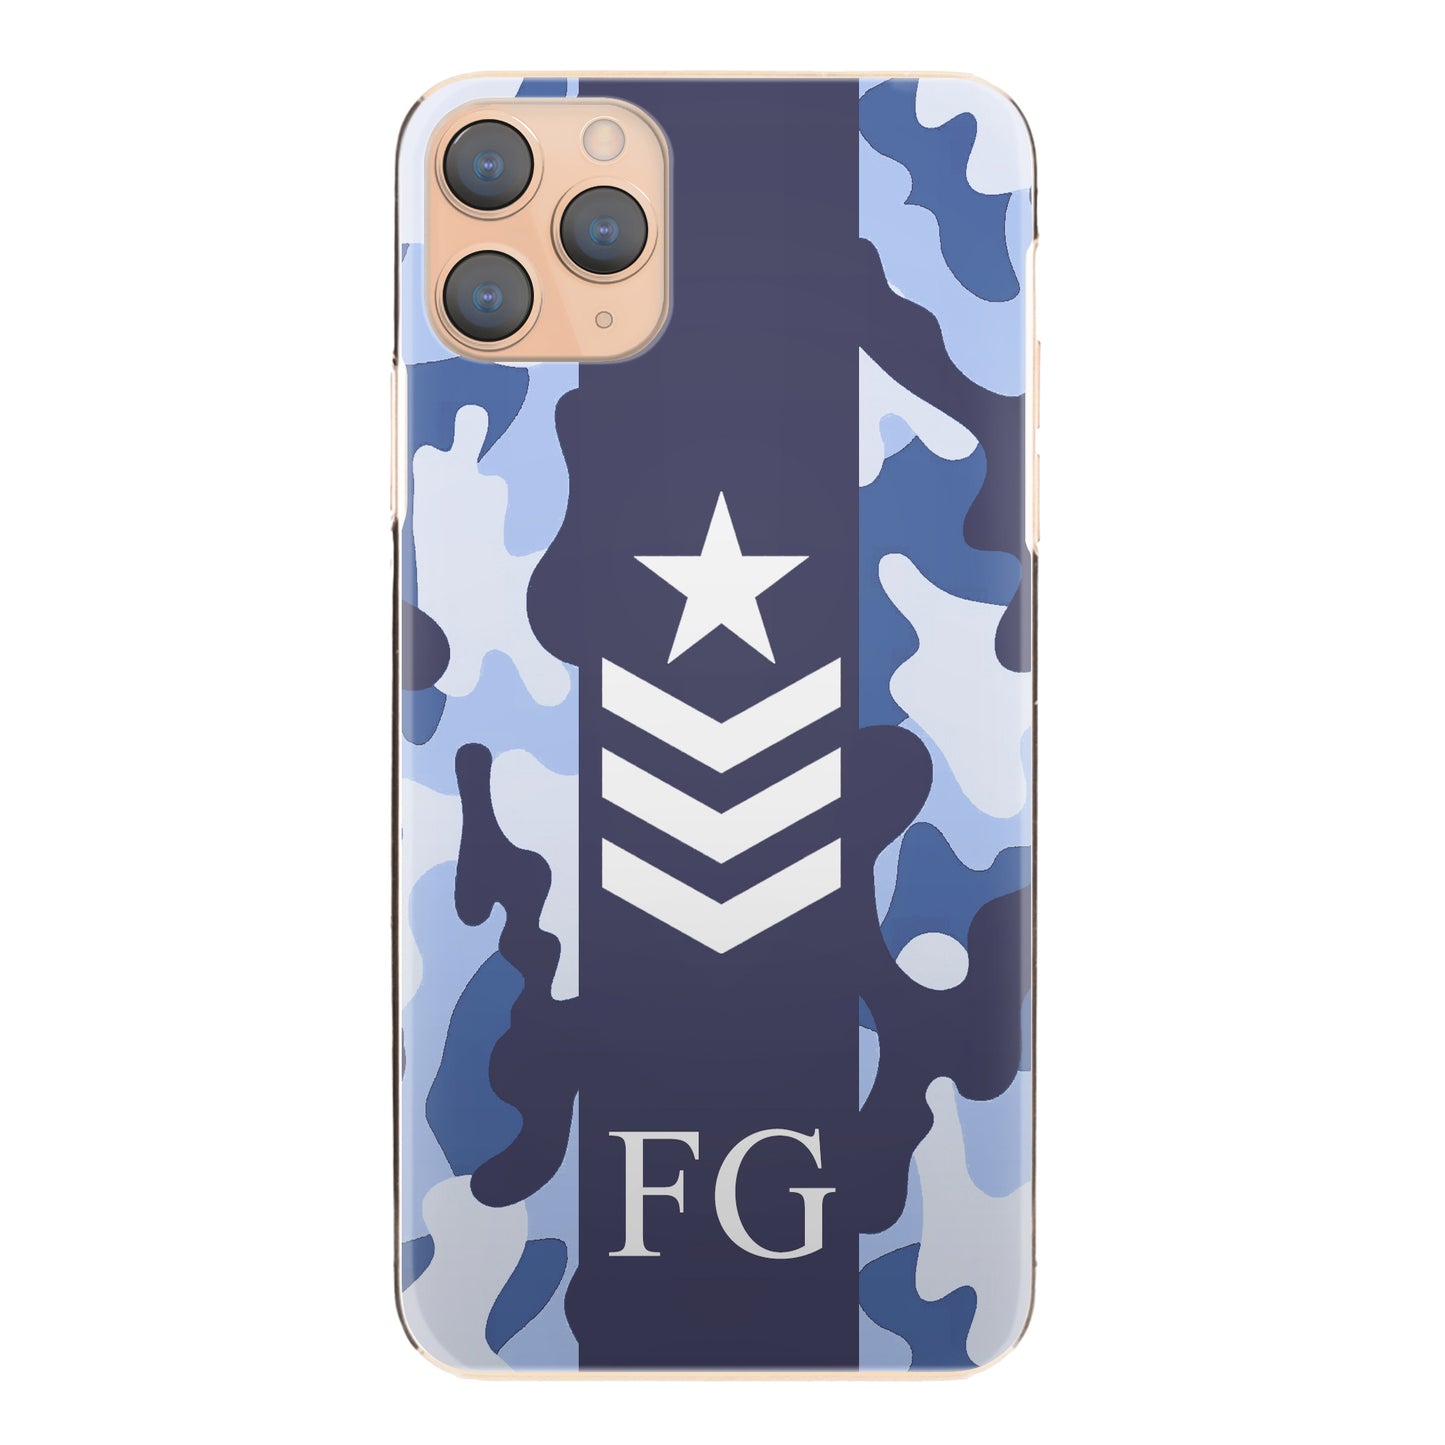 Personalised Honor Phone Hard Case with Initials and Army Rank on Blue Camo